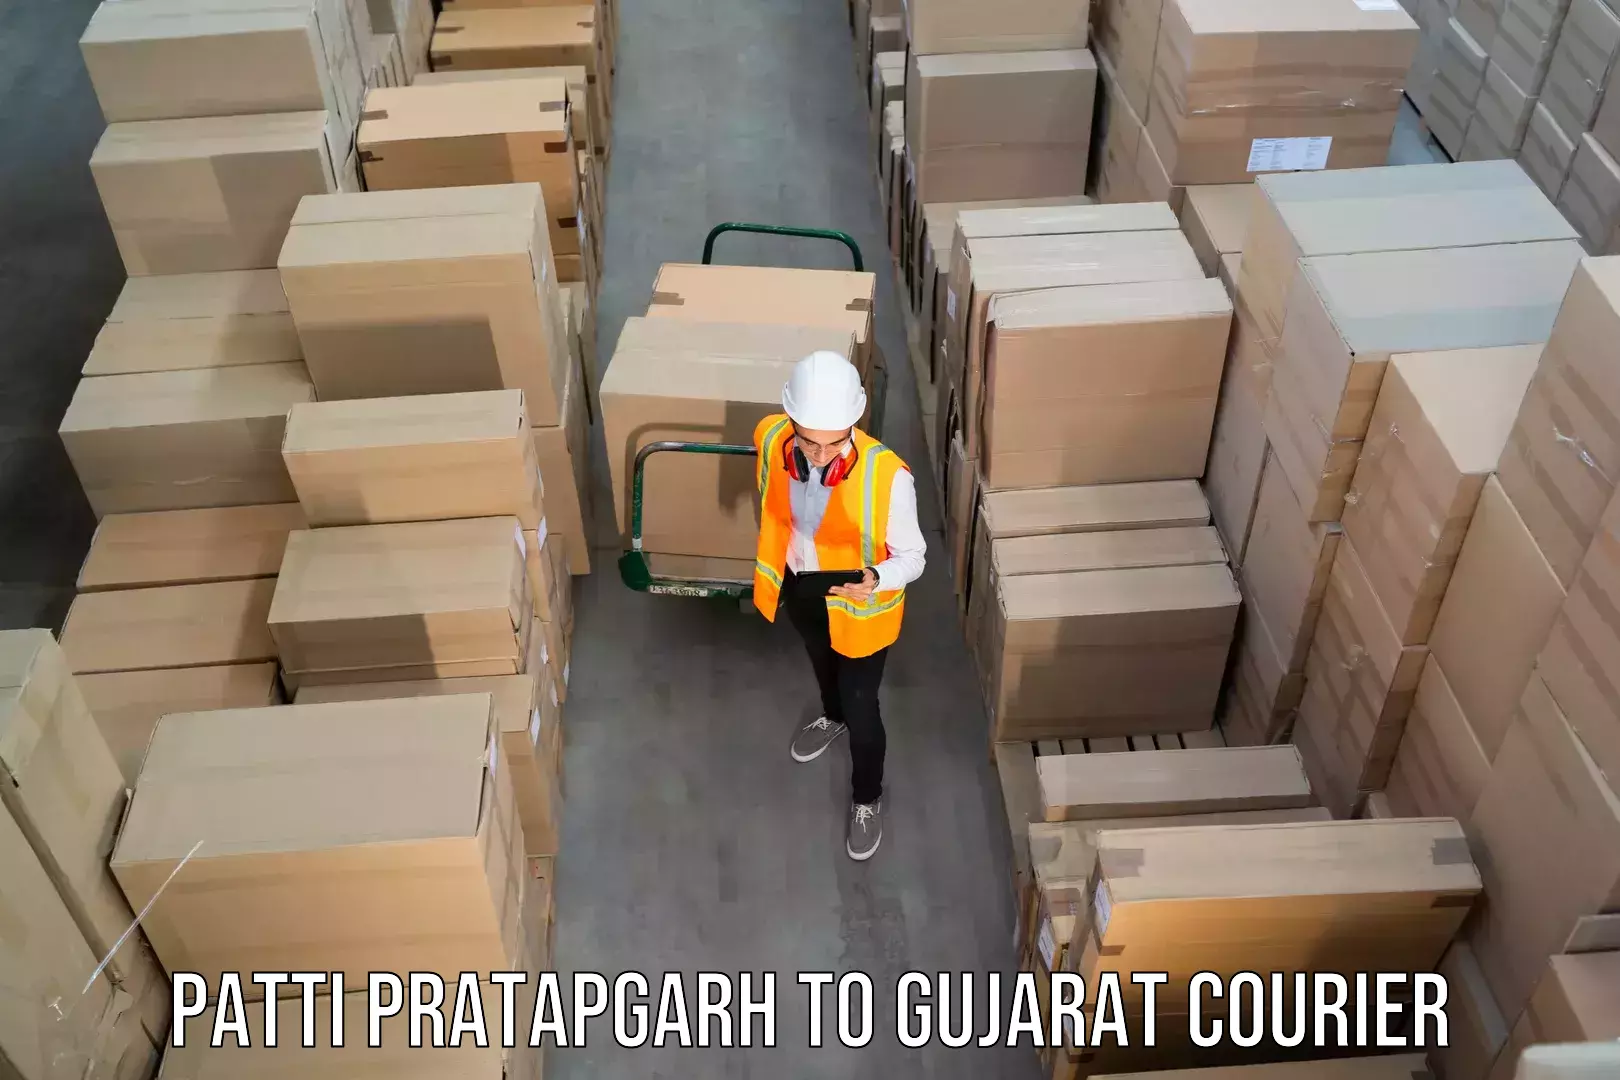 Full-service courier options Patti Pratapgarh to Ahmedabad